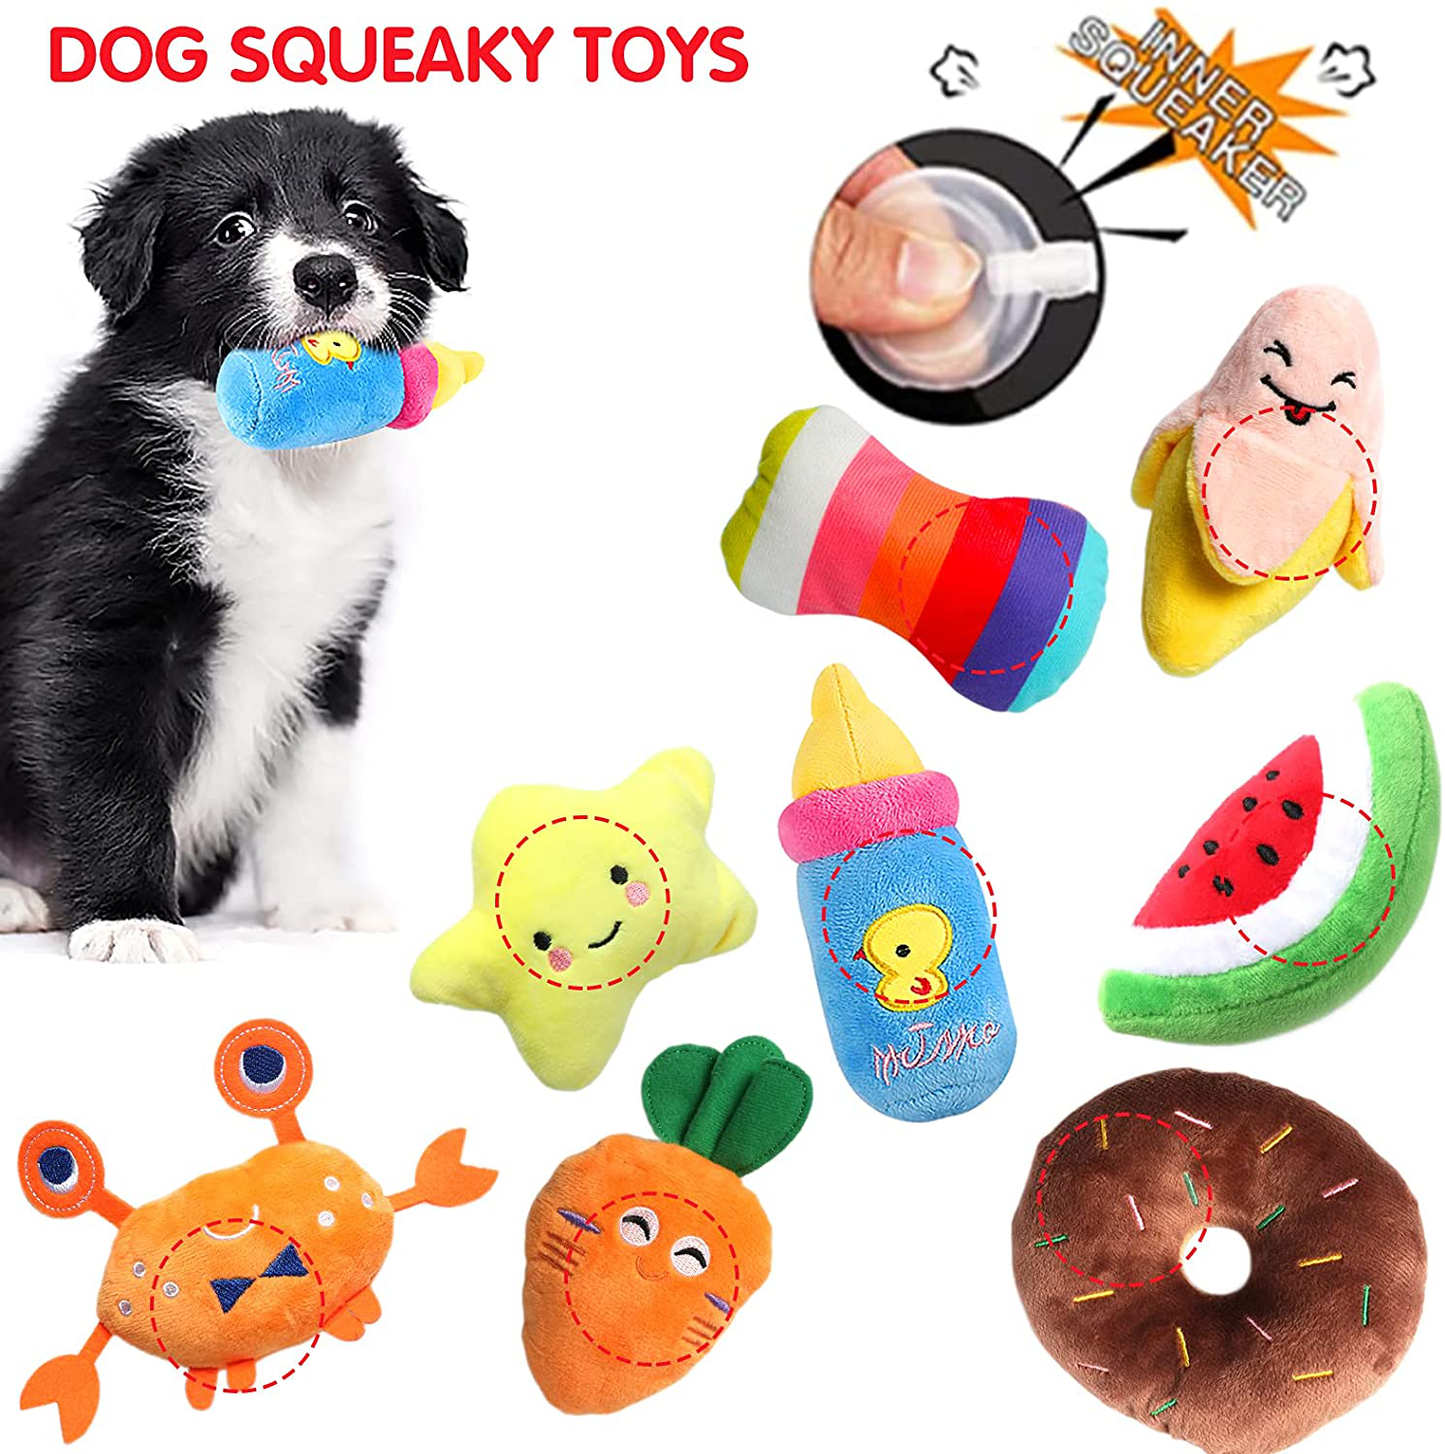 SYEENIFY Puppy Toys for Small Dogs, Teething Toys for Puppies,Cute Pig Toys for Small Dogs,Durable Chew Toys for Puppies,100% Natural Cotton Rope Chew Toys, Safe, Non-Toxic Animals & Pet Supplies > Pet Supplies > Dog Supplies > Dog Toys SYEENIFY   